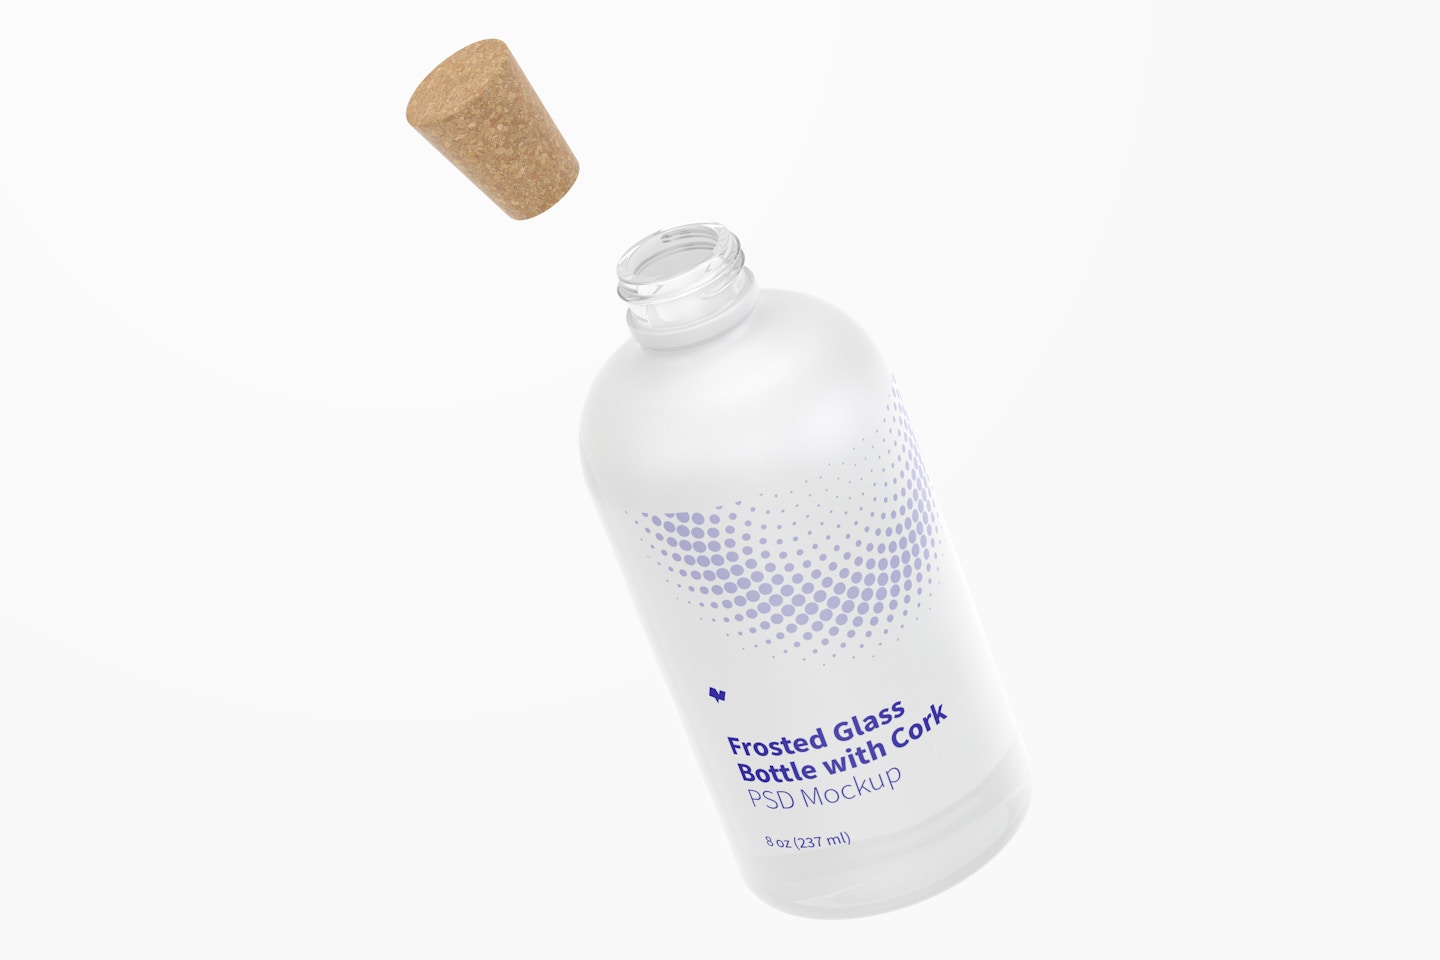 Frosted Glass Bottle with Cork Mockup, Floating